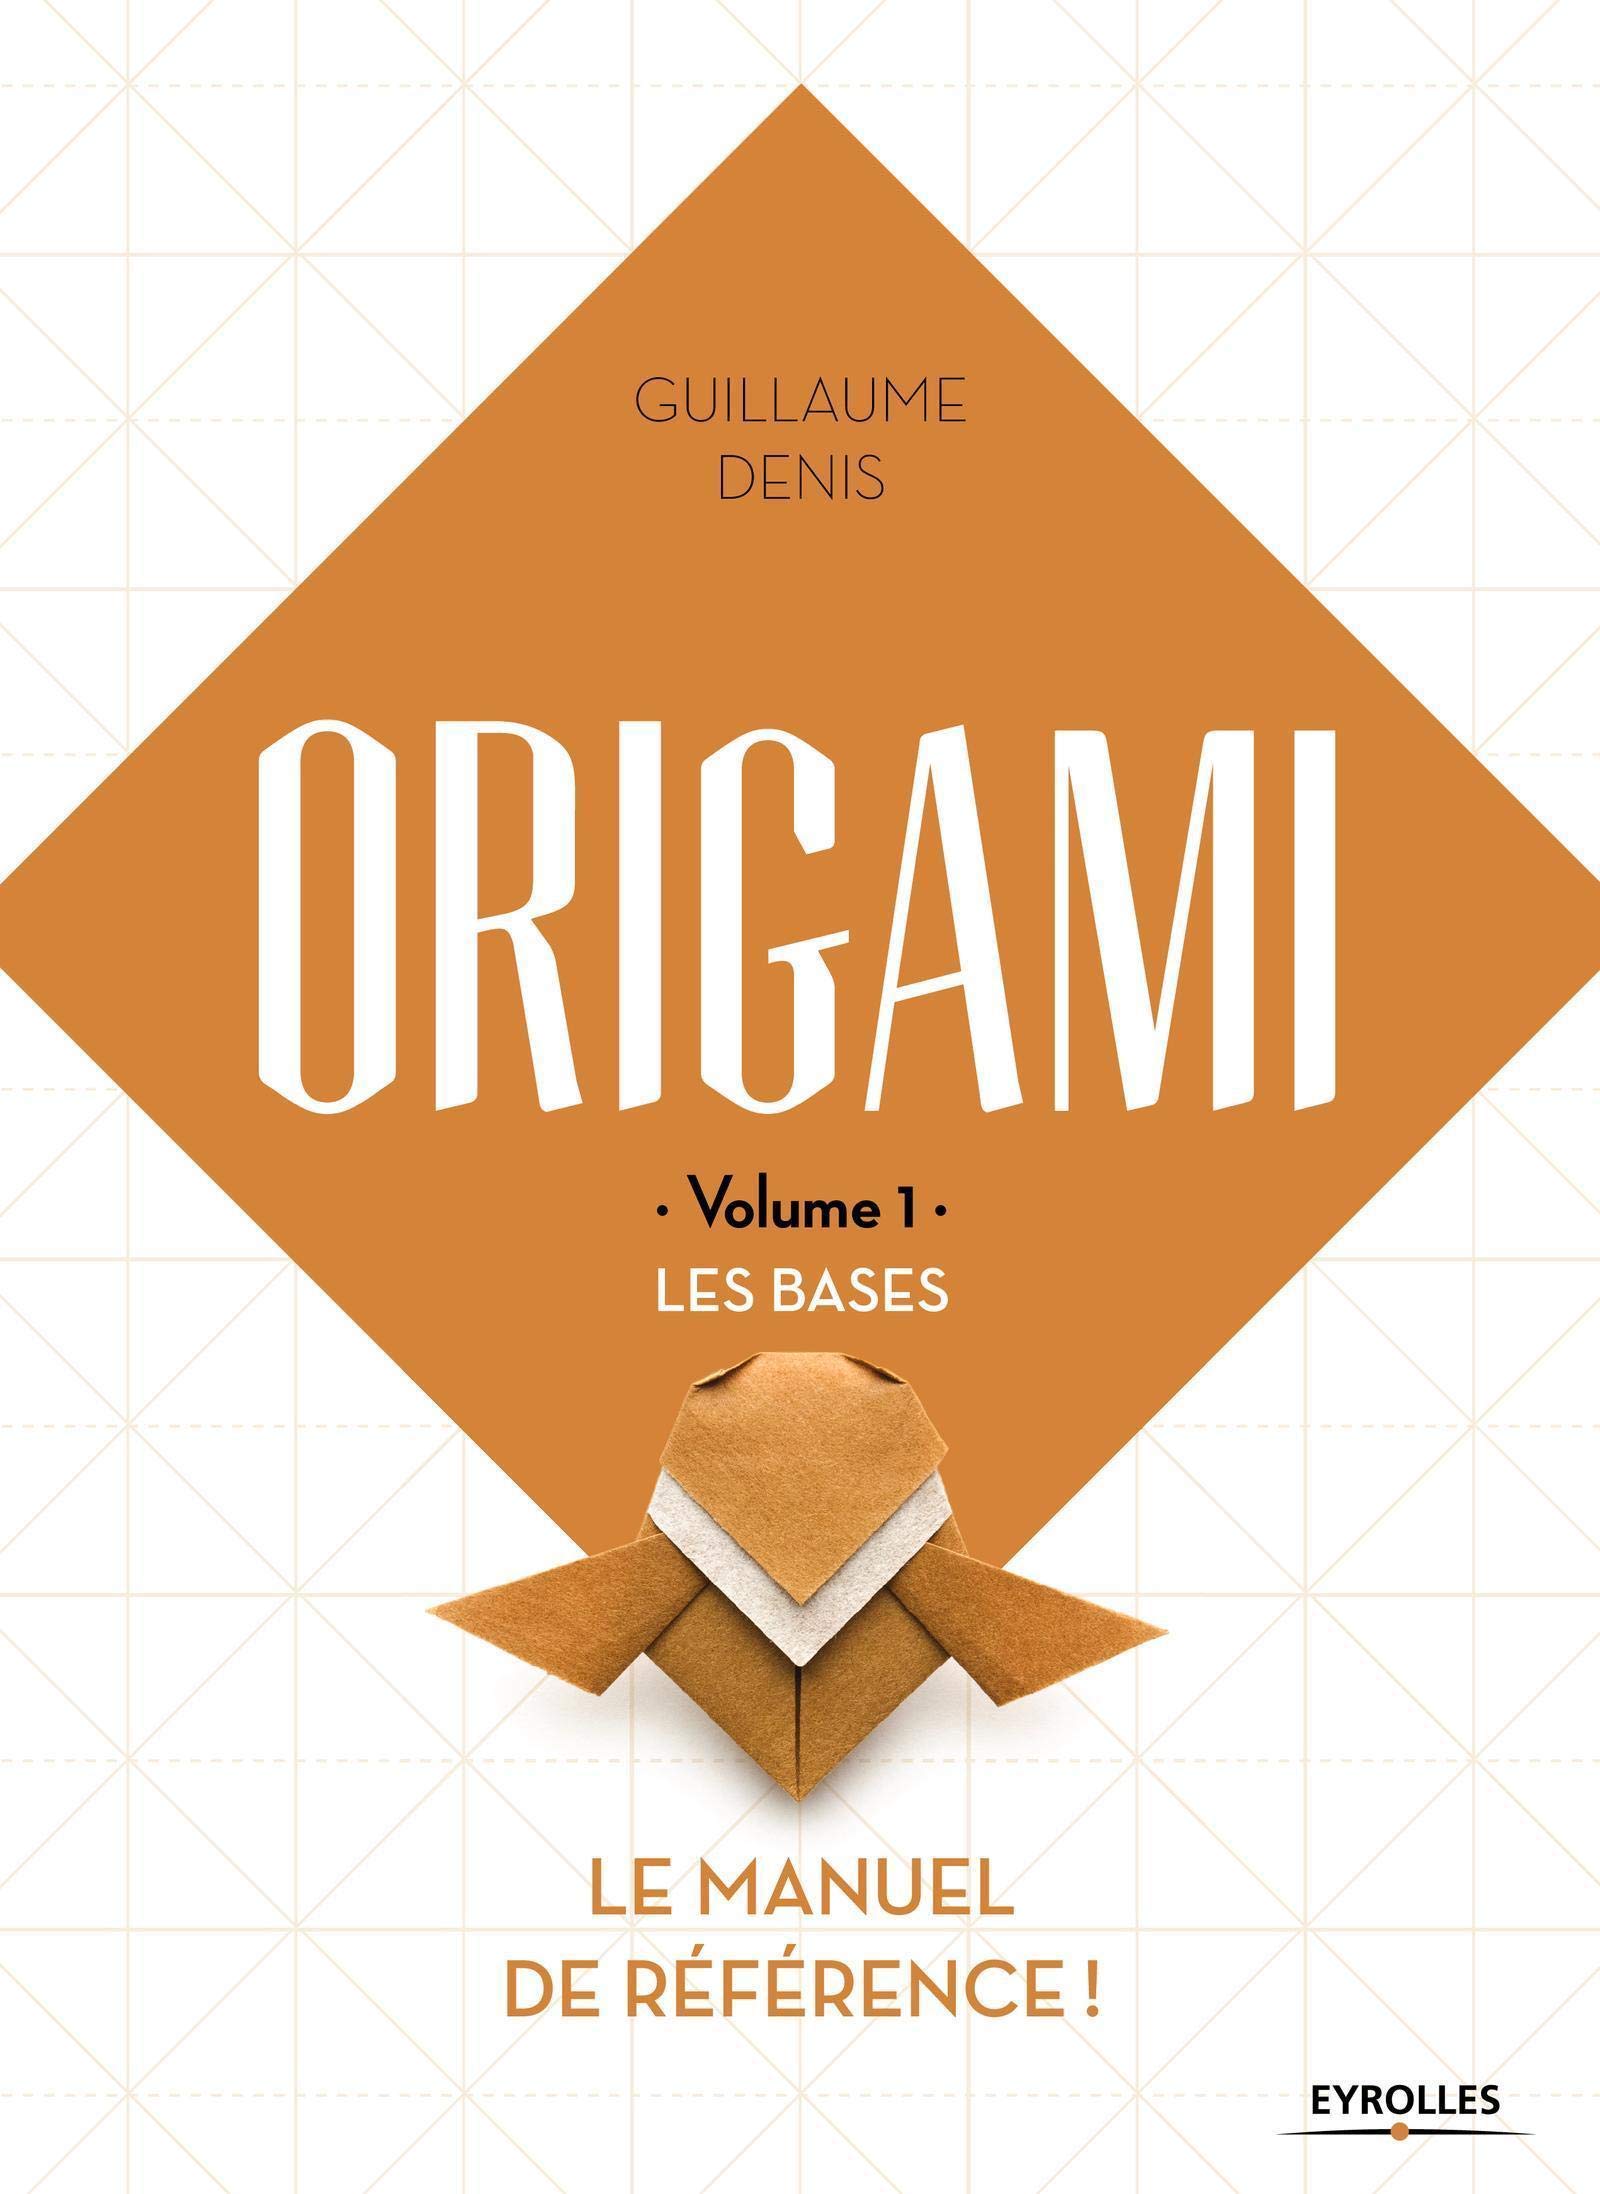 ORIGAMI - Volume 1 - LES BASES : page 156.